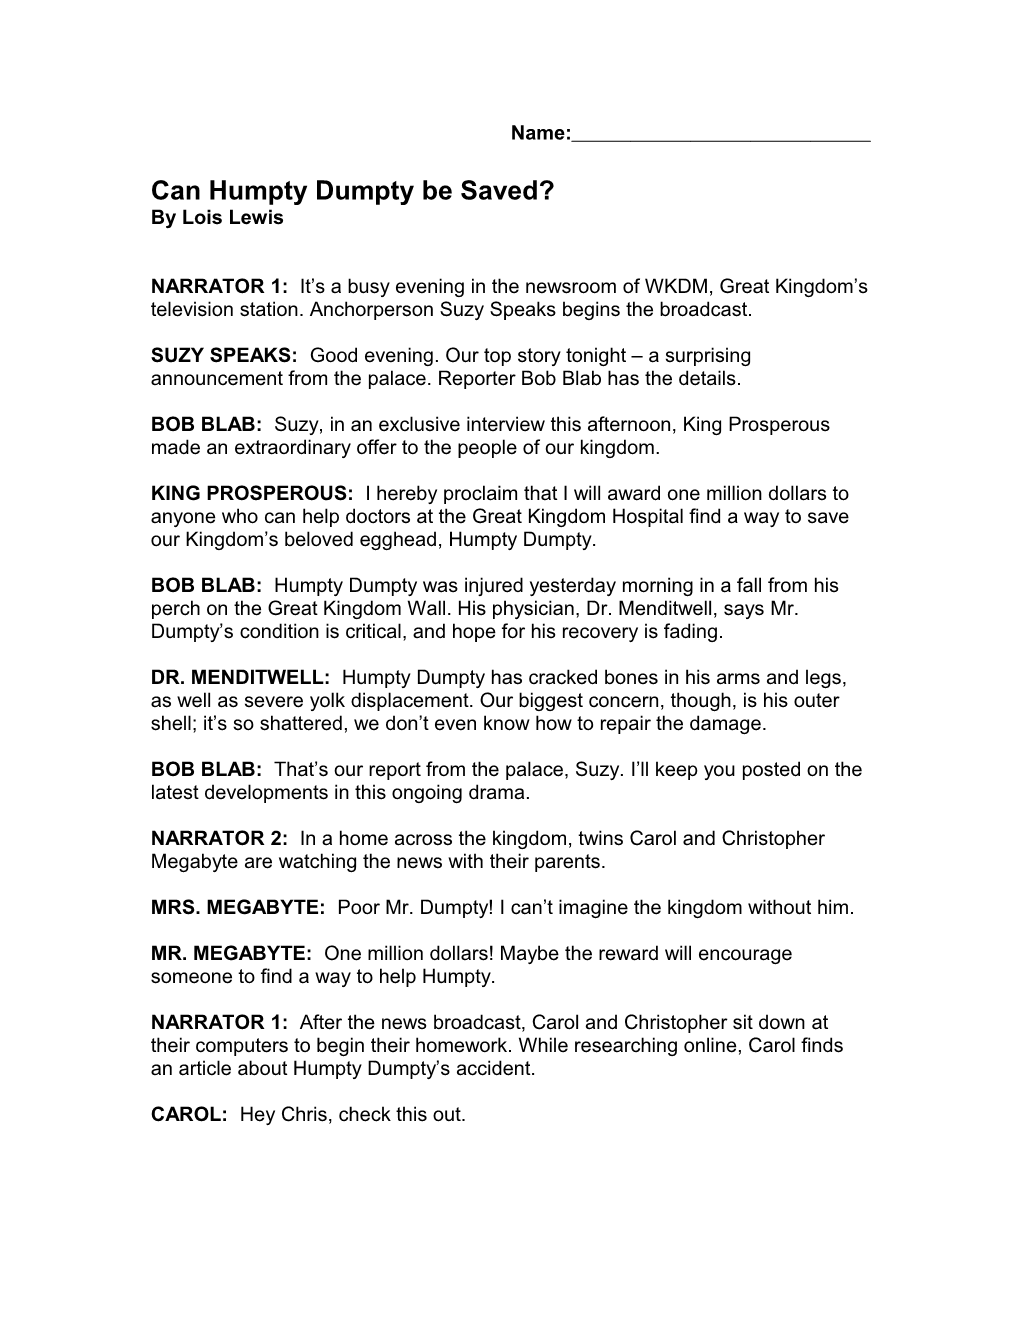 Can Humpty Dumpty Be Saved?